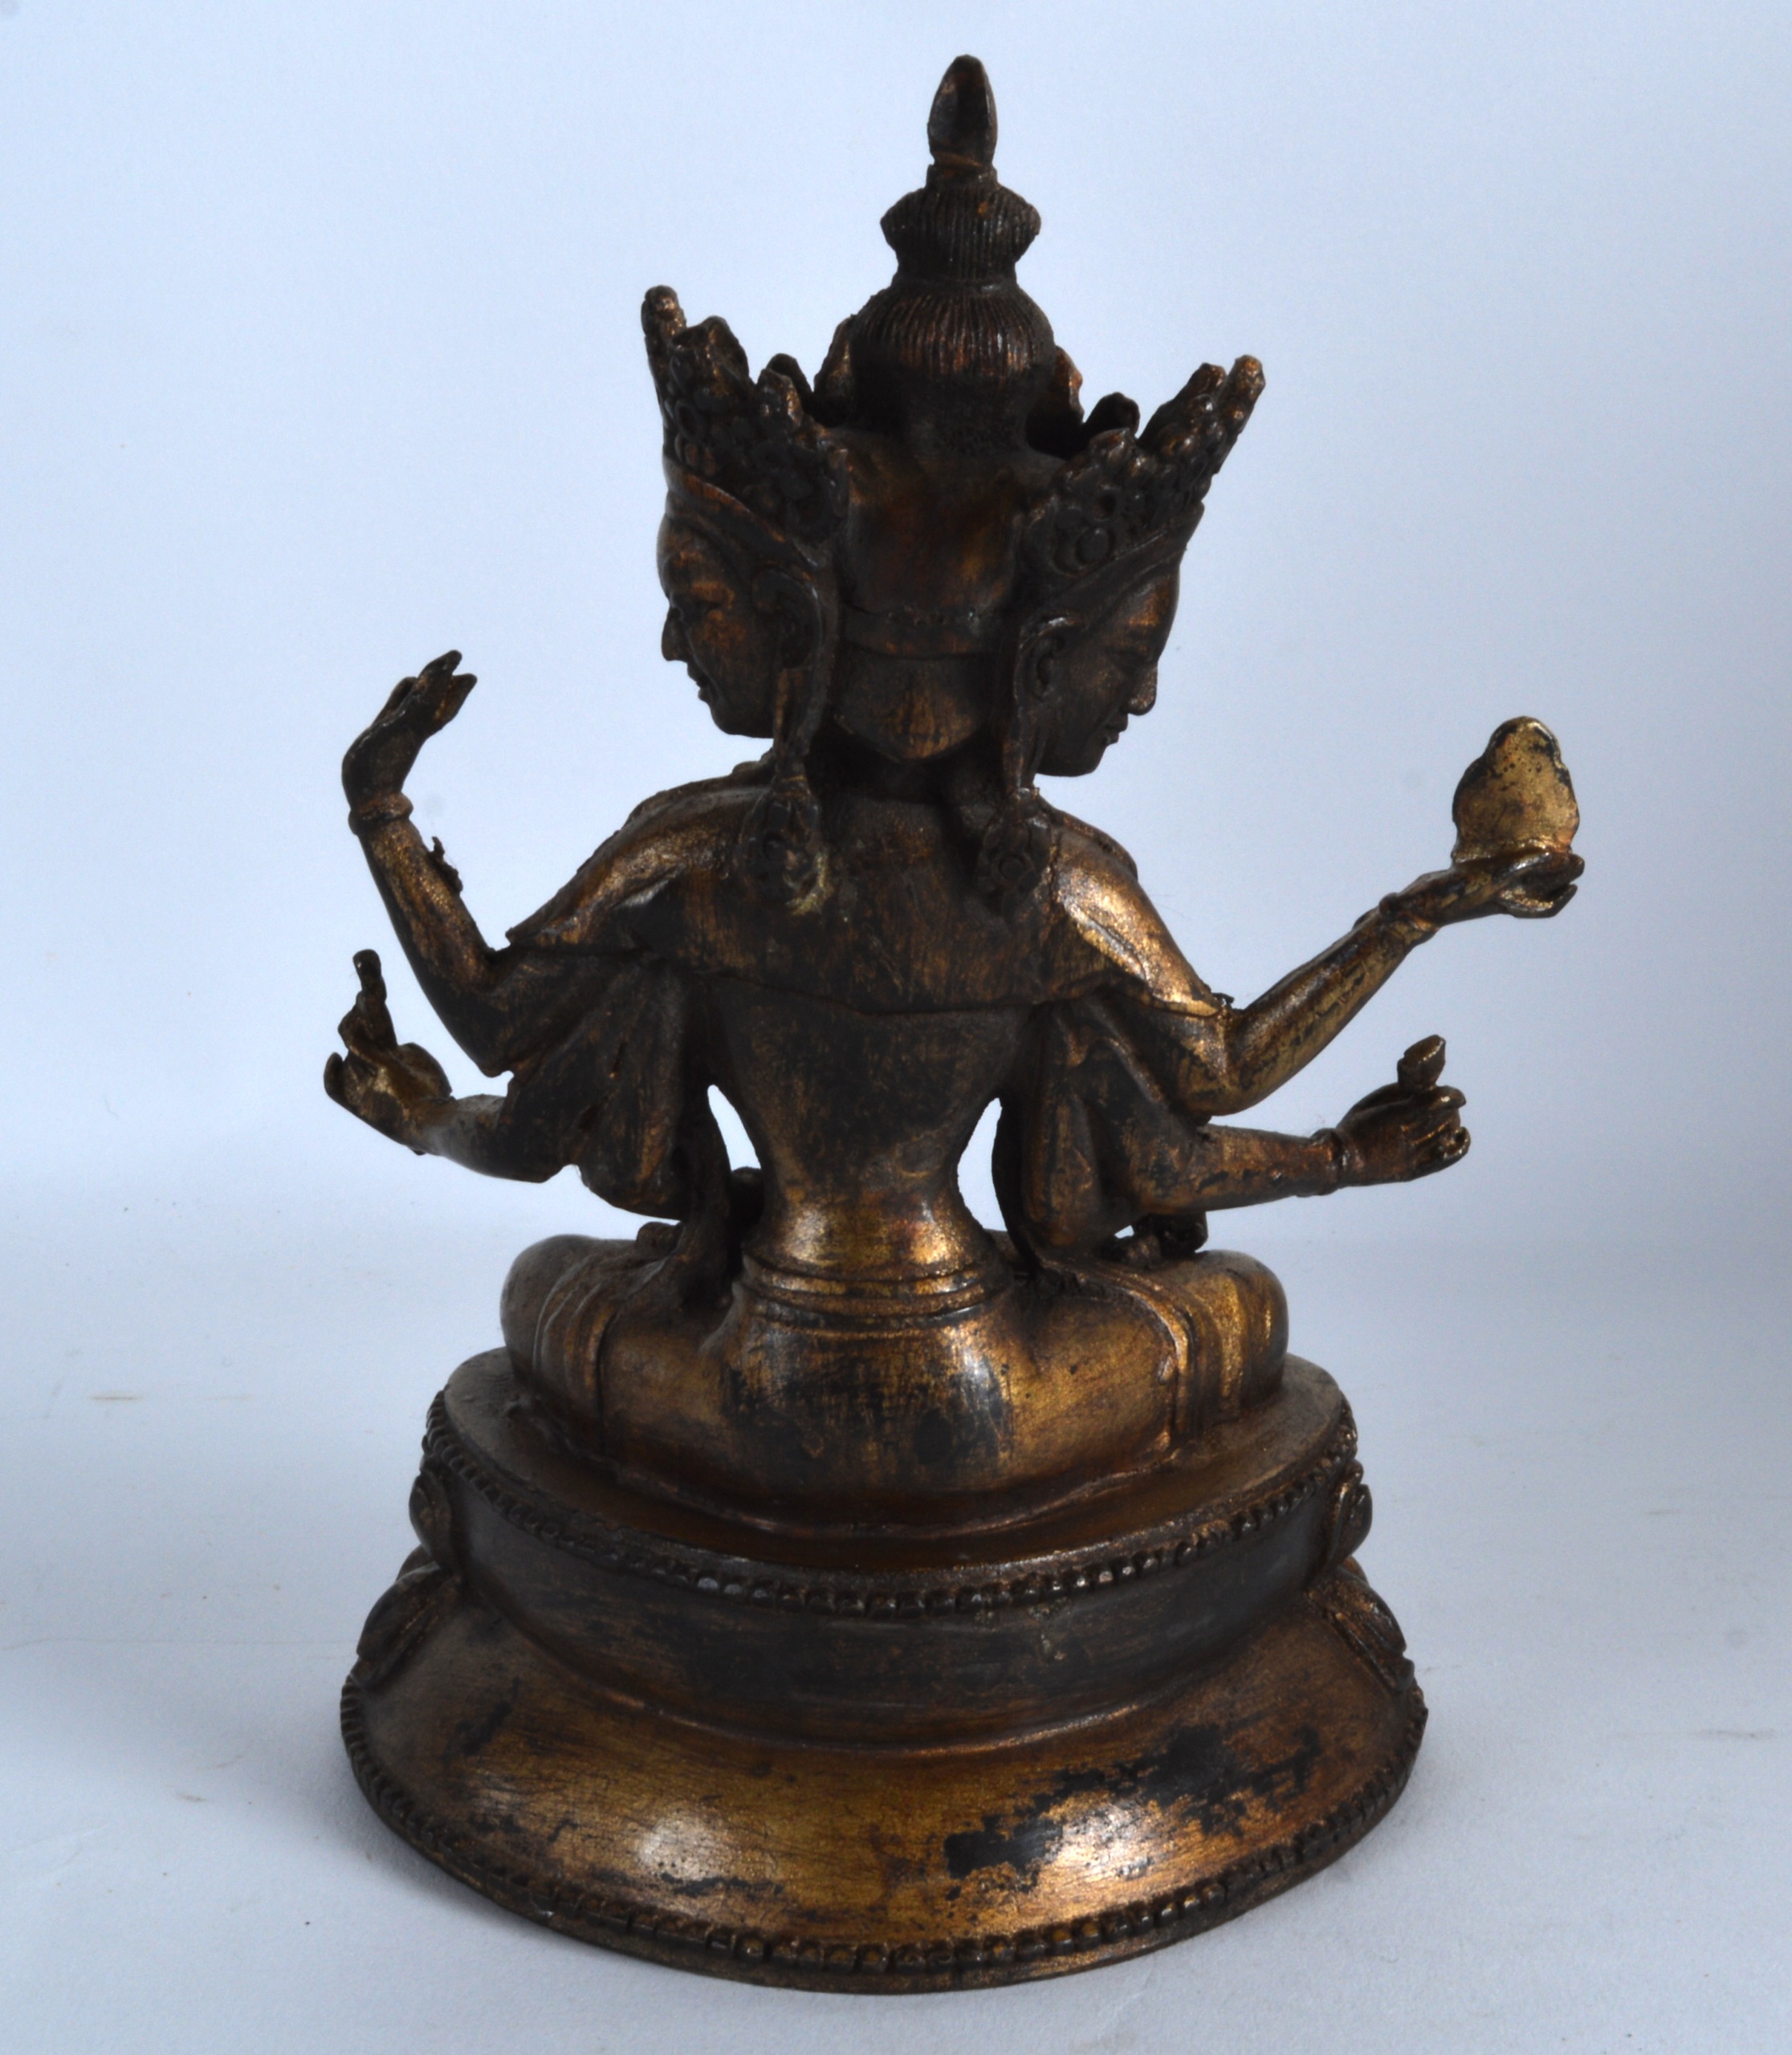 A CHINESE LACQUERED BRONZE FIGURE OF A BUDDHIST GOD modelled upon a triangular base. 7.5ins high. - Image 2 of 3